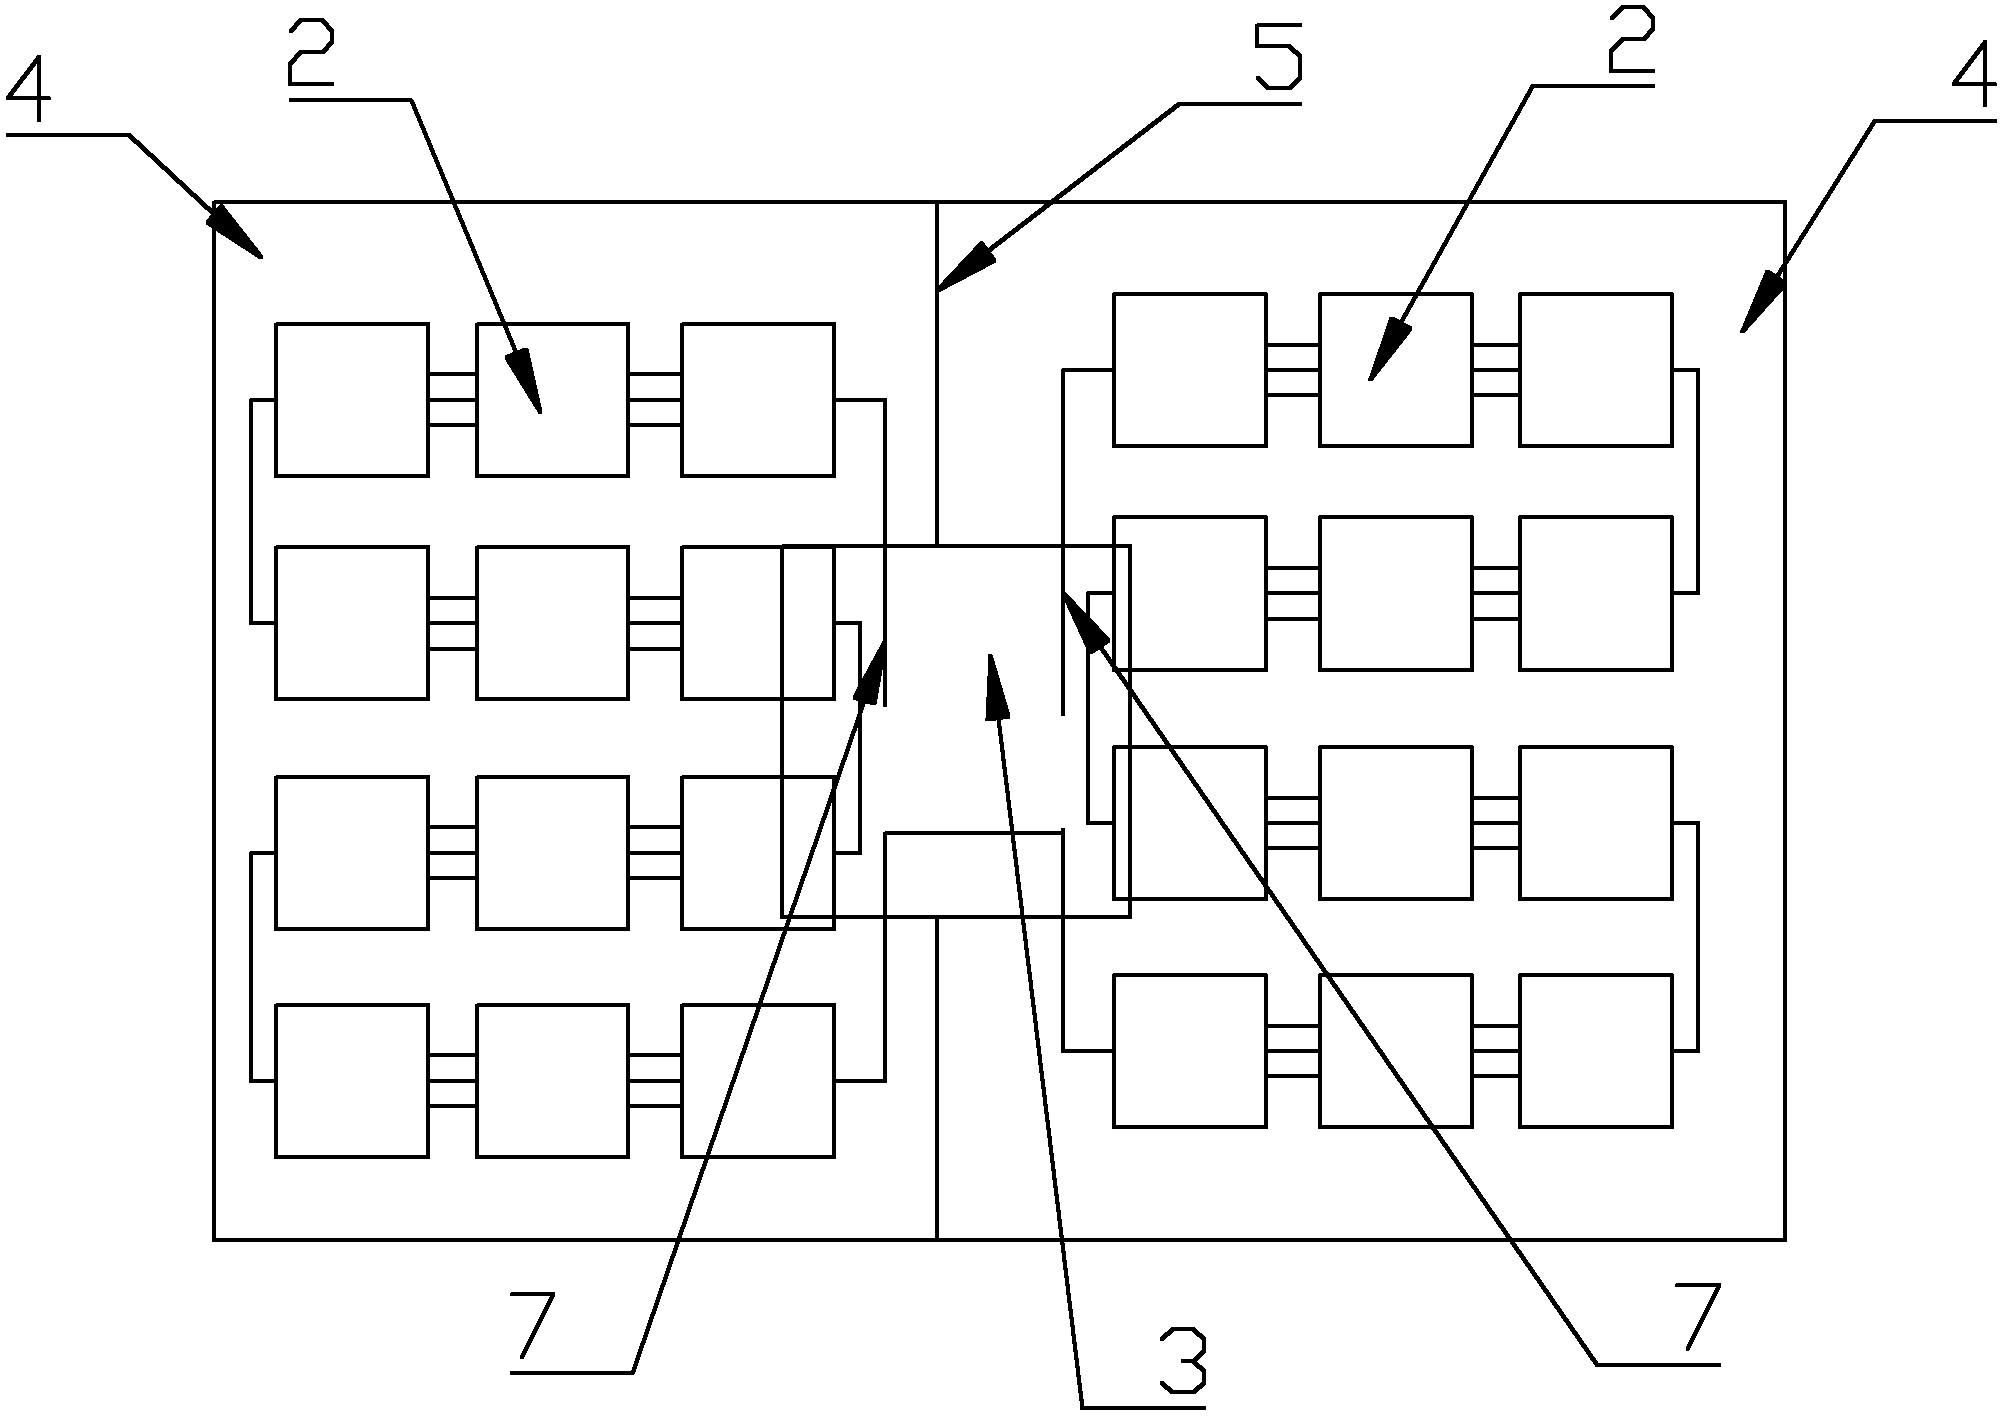 Double-glass photovoltaic module with back glass being separated